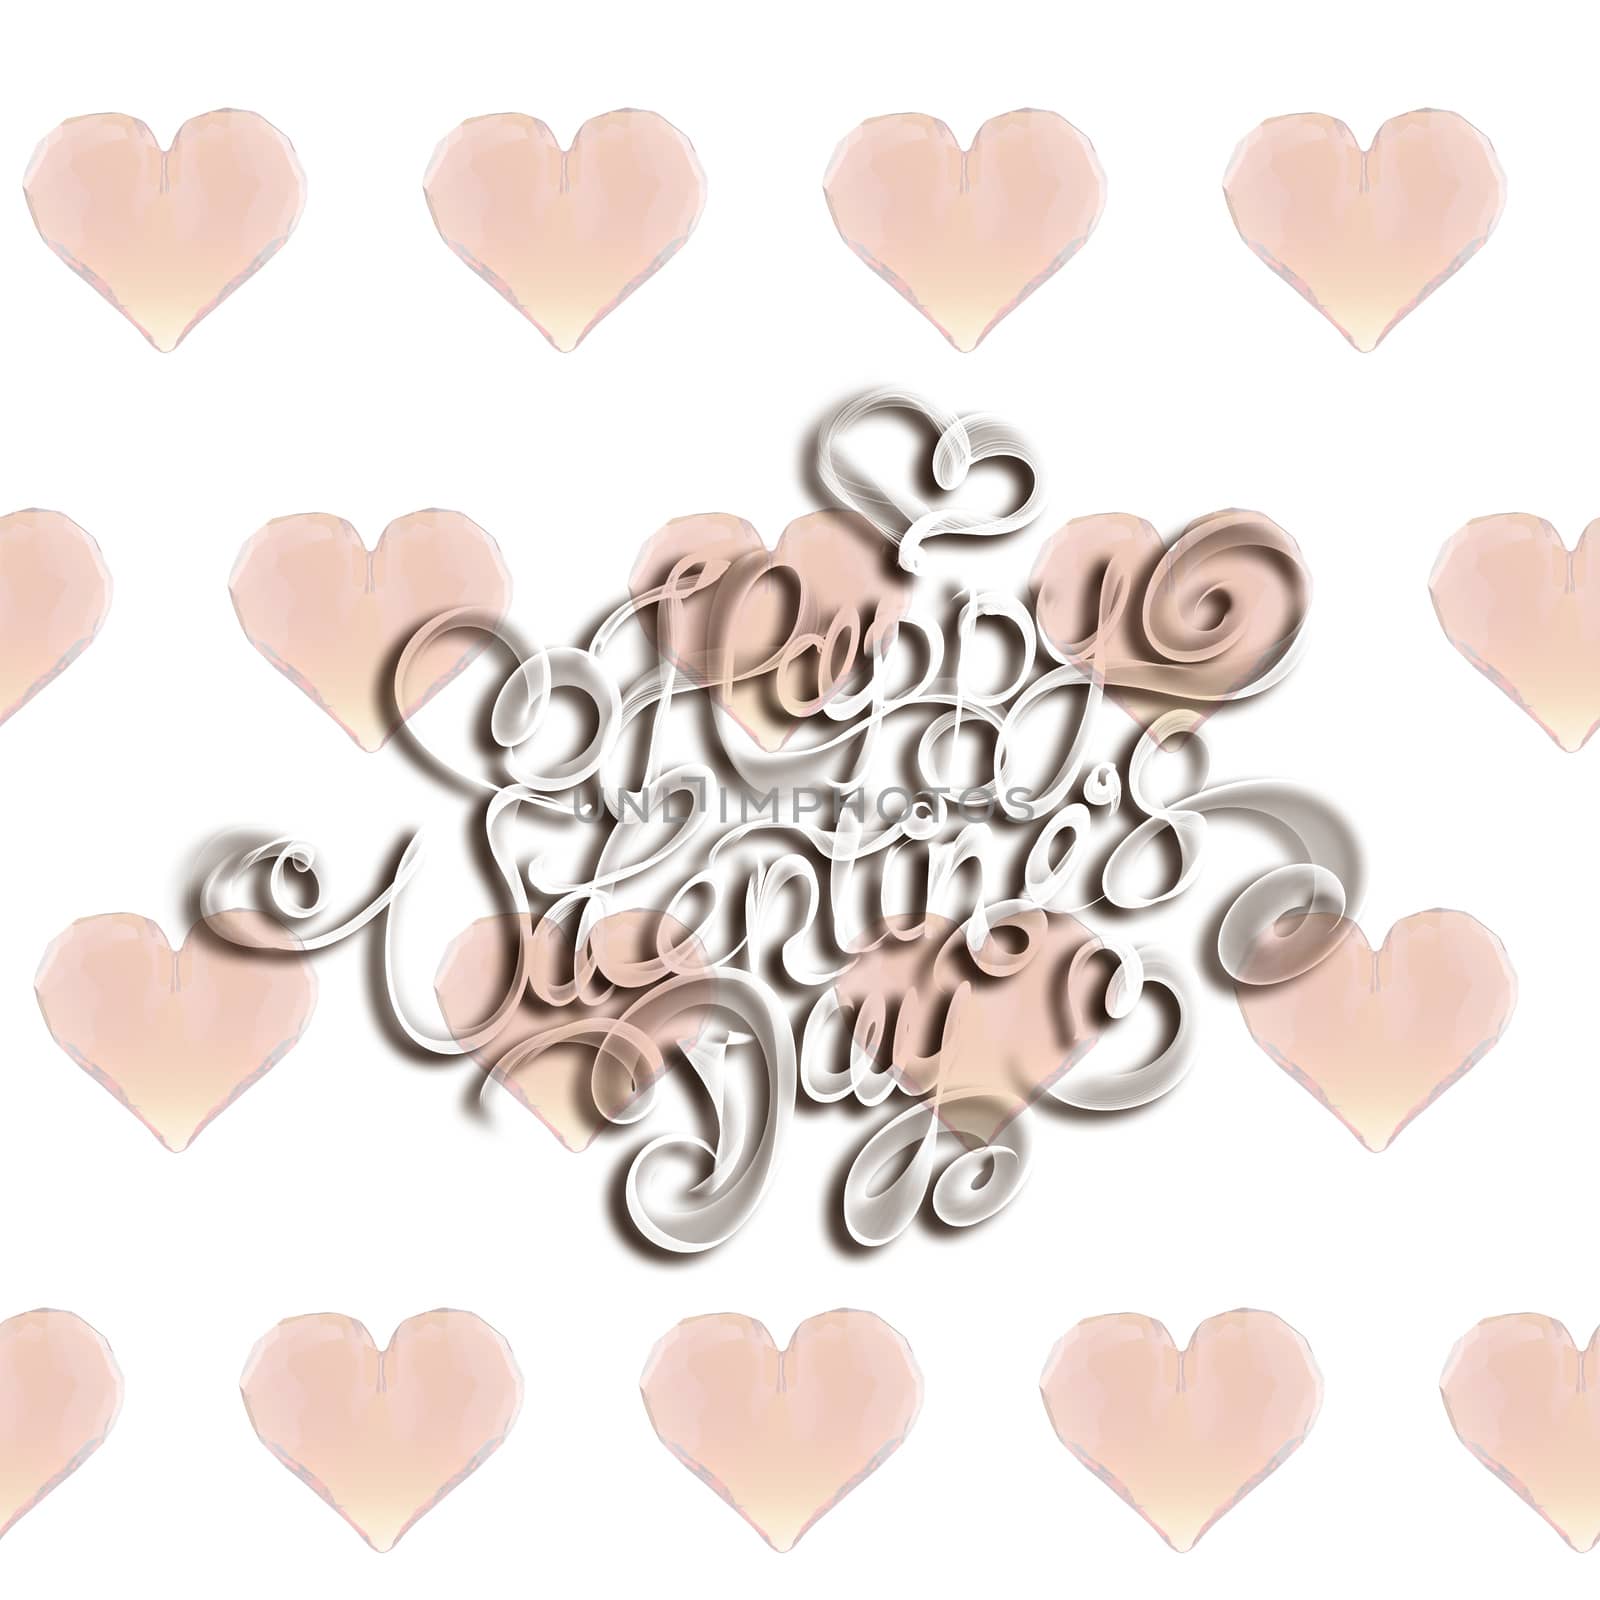 Happy Valentines day vintage lettering written by fire or smoke over bright seamless background full of flying hearts. 3d illustration by skrotov